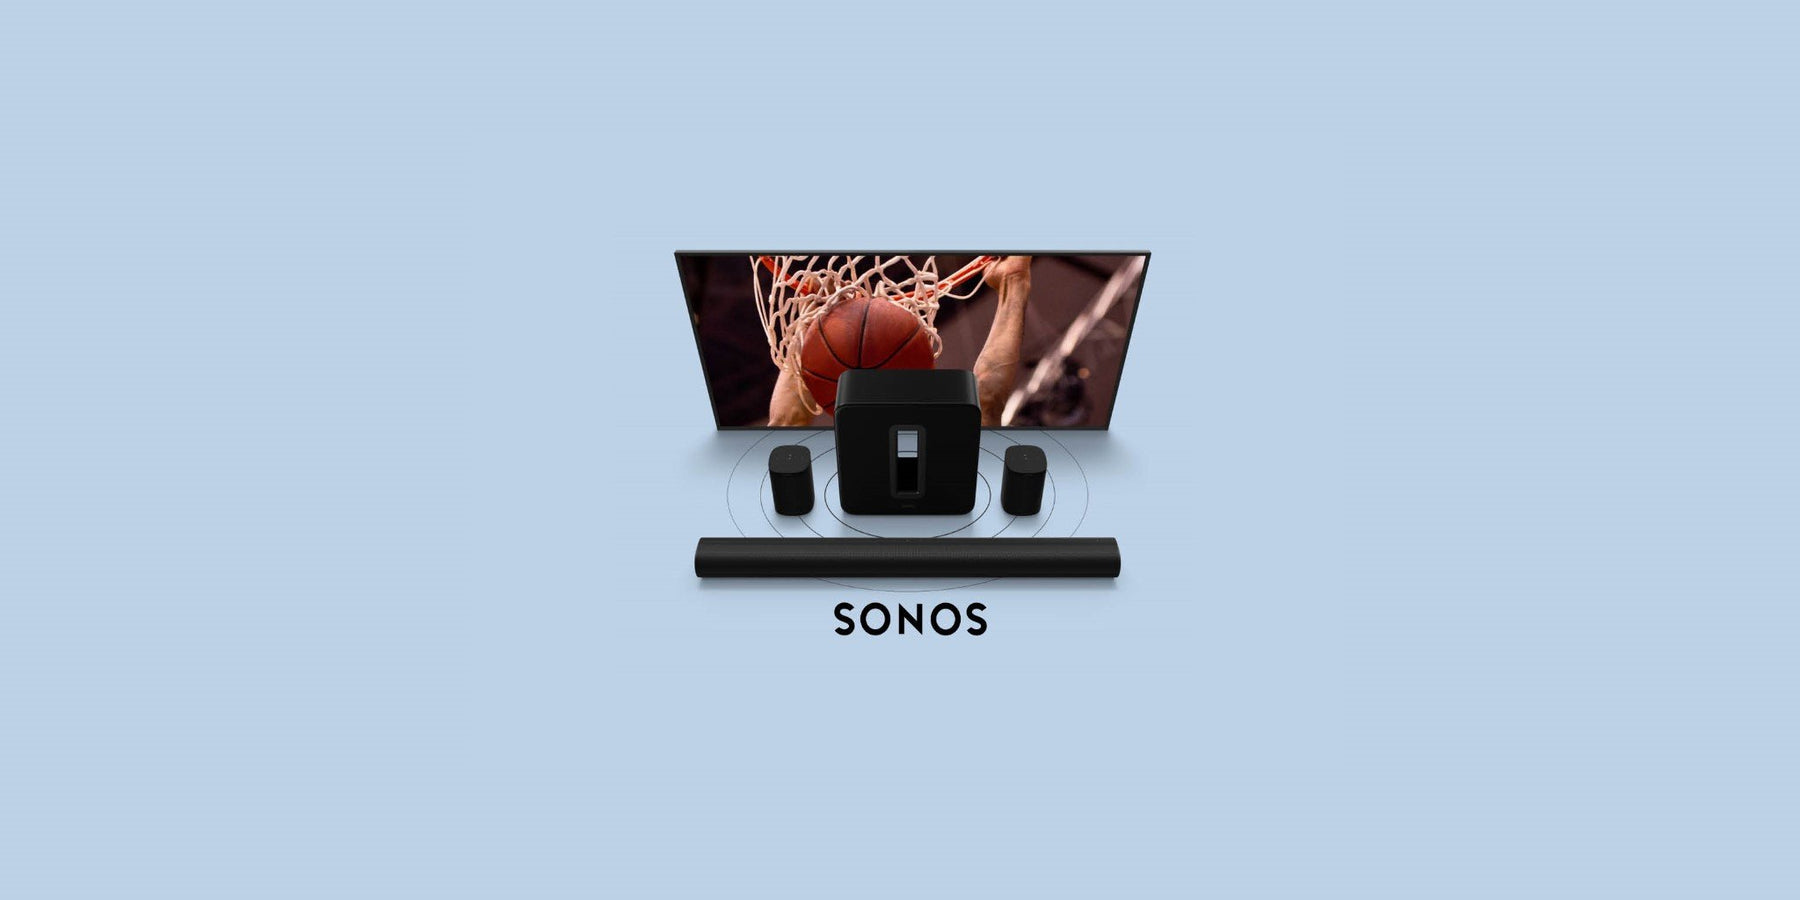 SONOS: Its history, its products. Unanimously appreciated!-Bax Audio Video